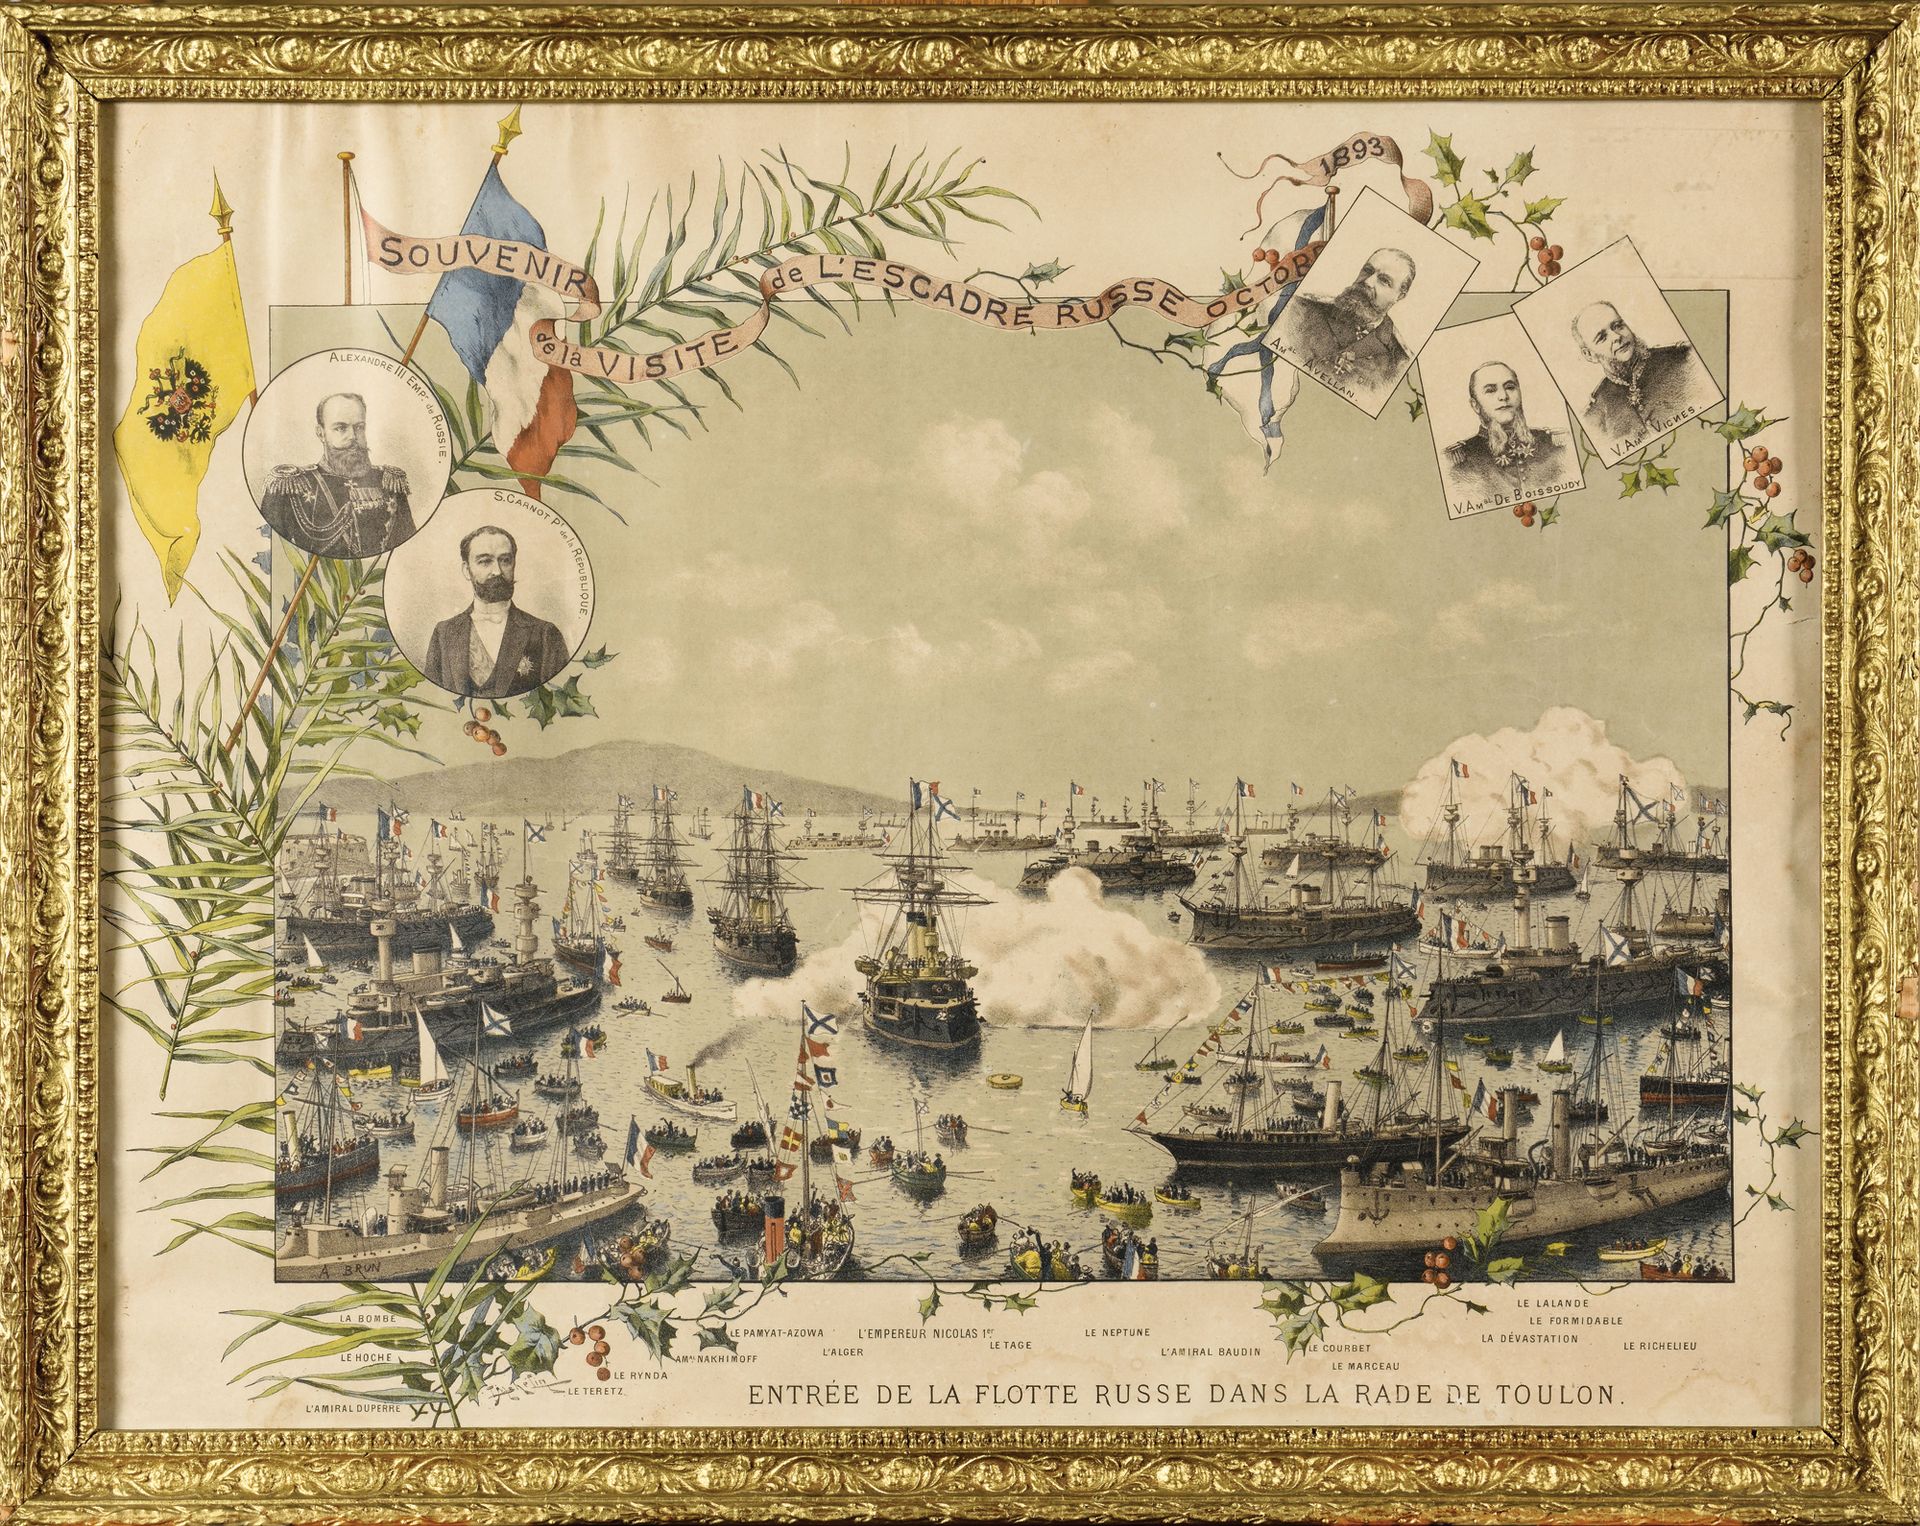 Null SOUVENIR OF THE VISIT OF THE RUSSIAN SQUADRON IN OCTOBER 1893

Entry of the&hellip;